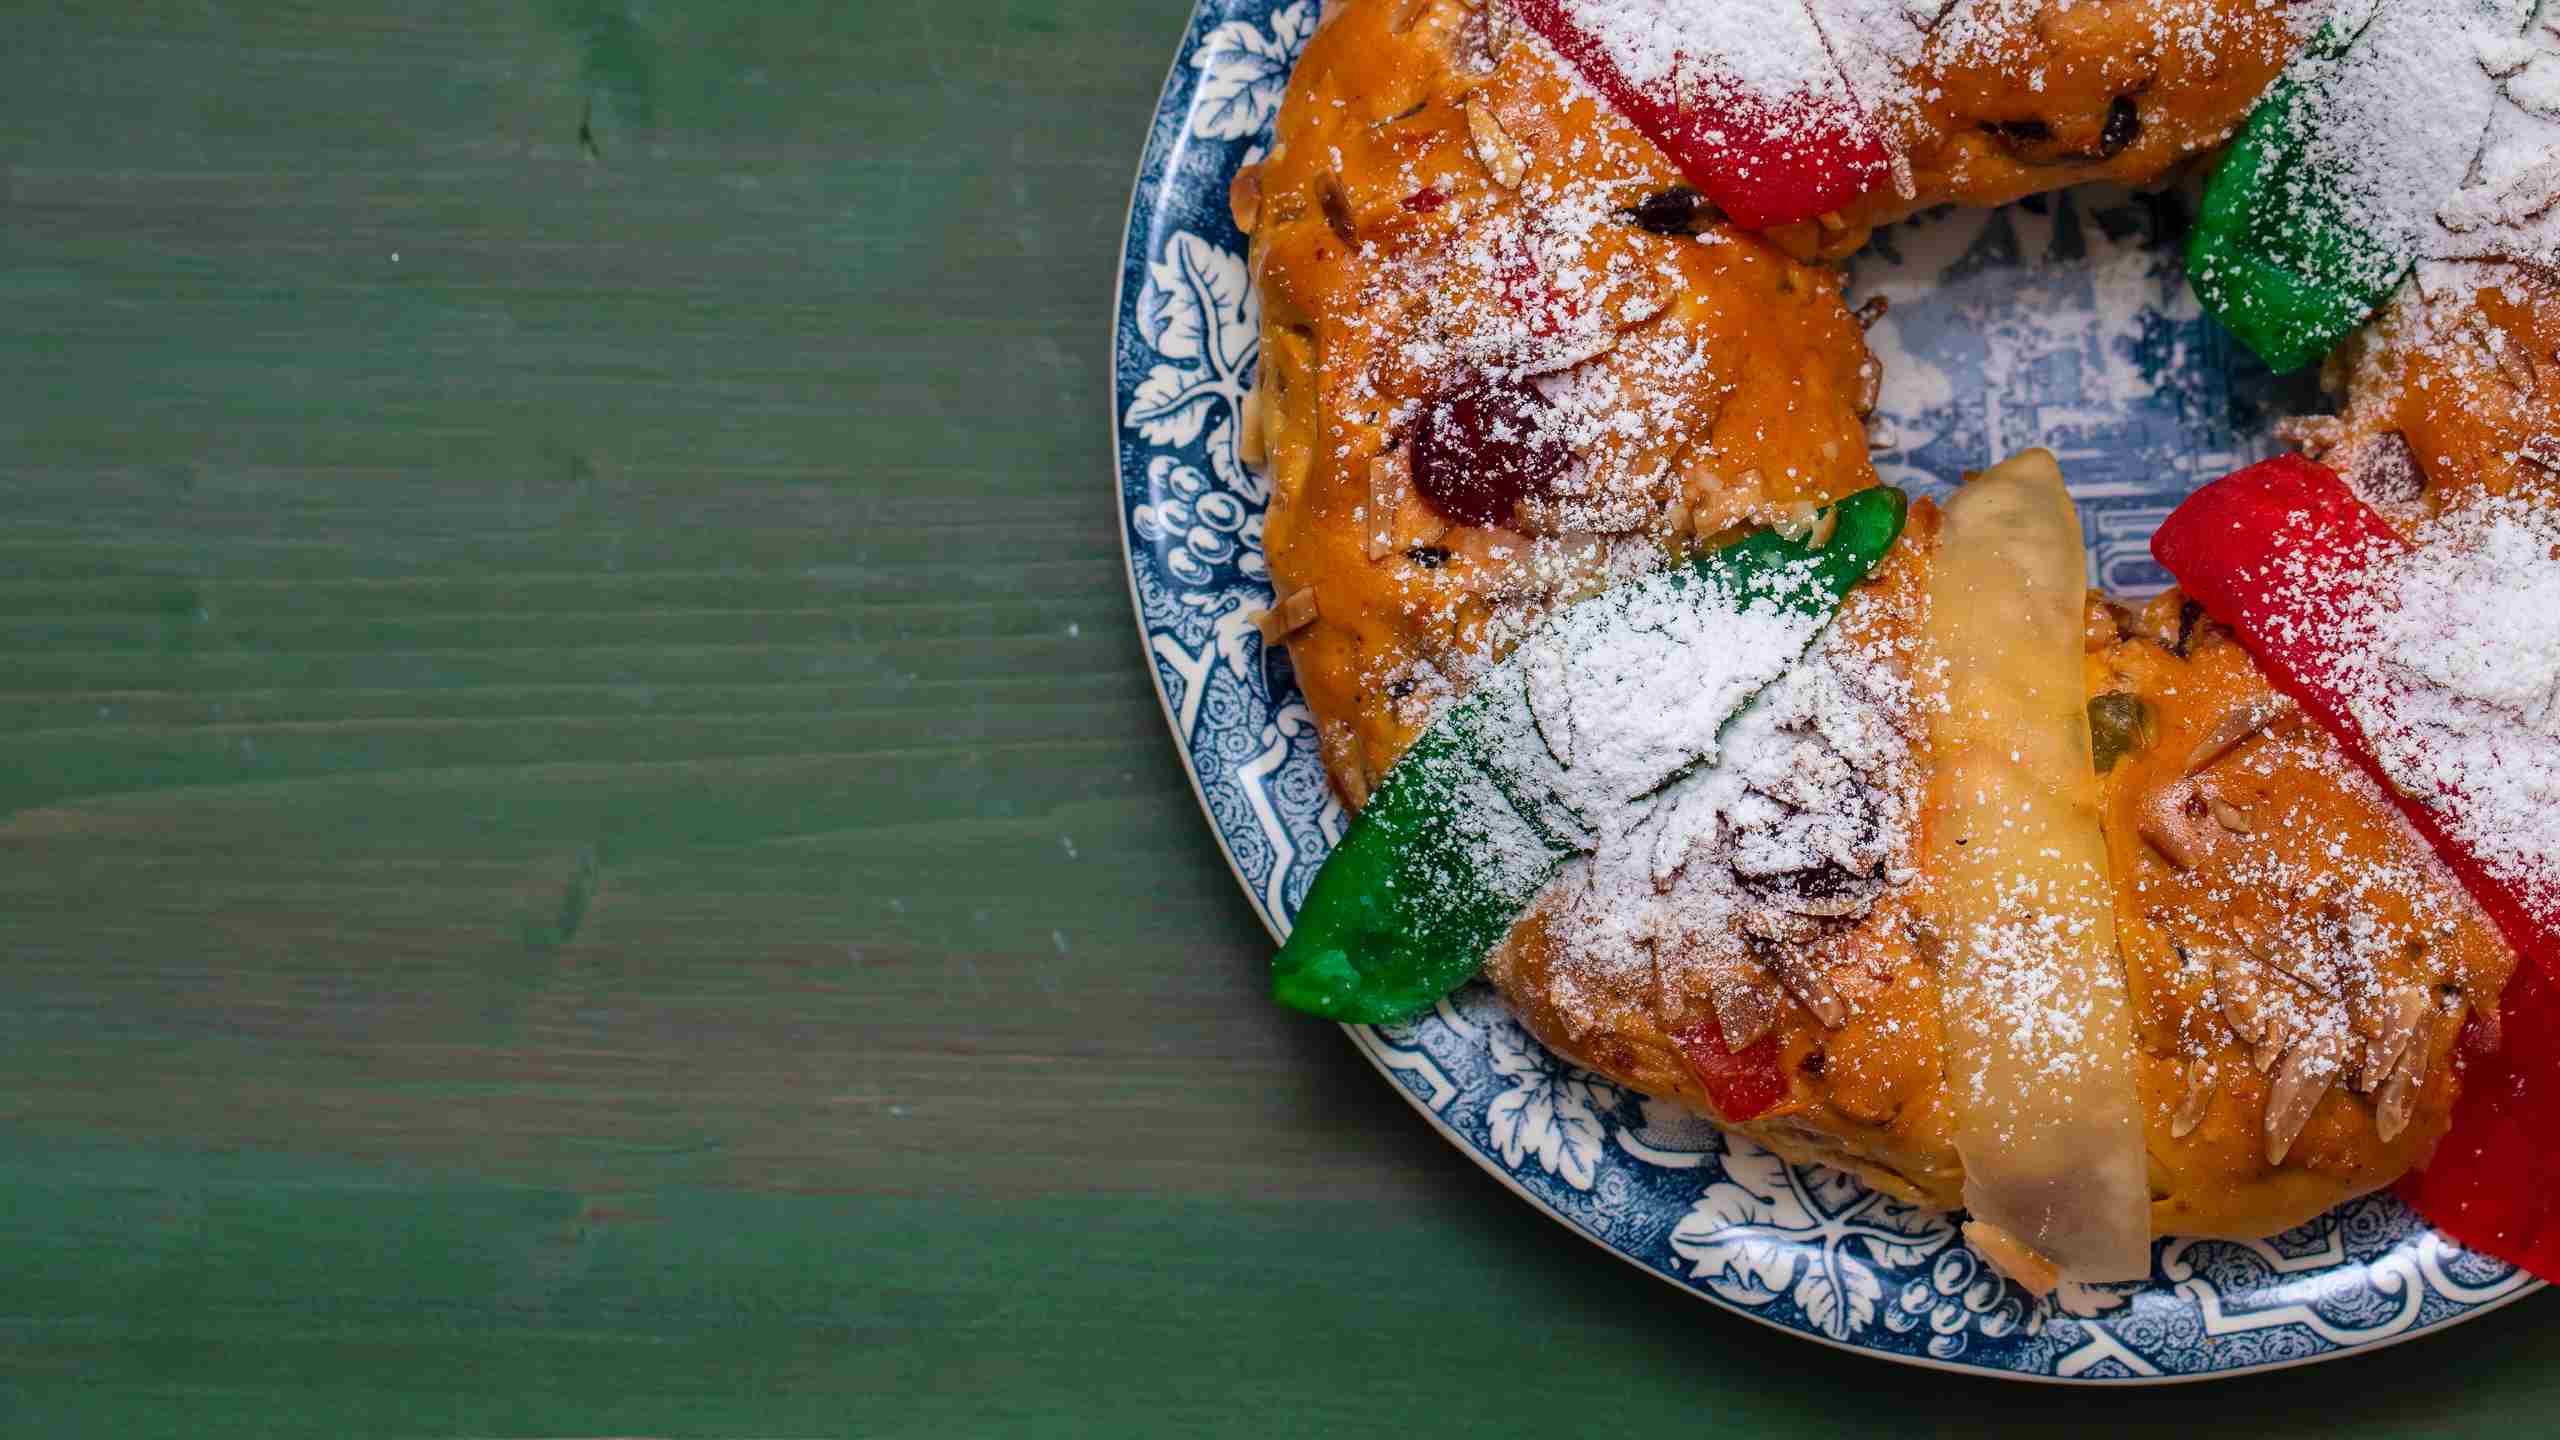 Bolo-rei, the king of cakes is Christmas on a plate